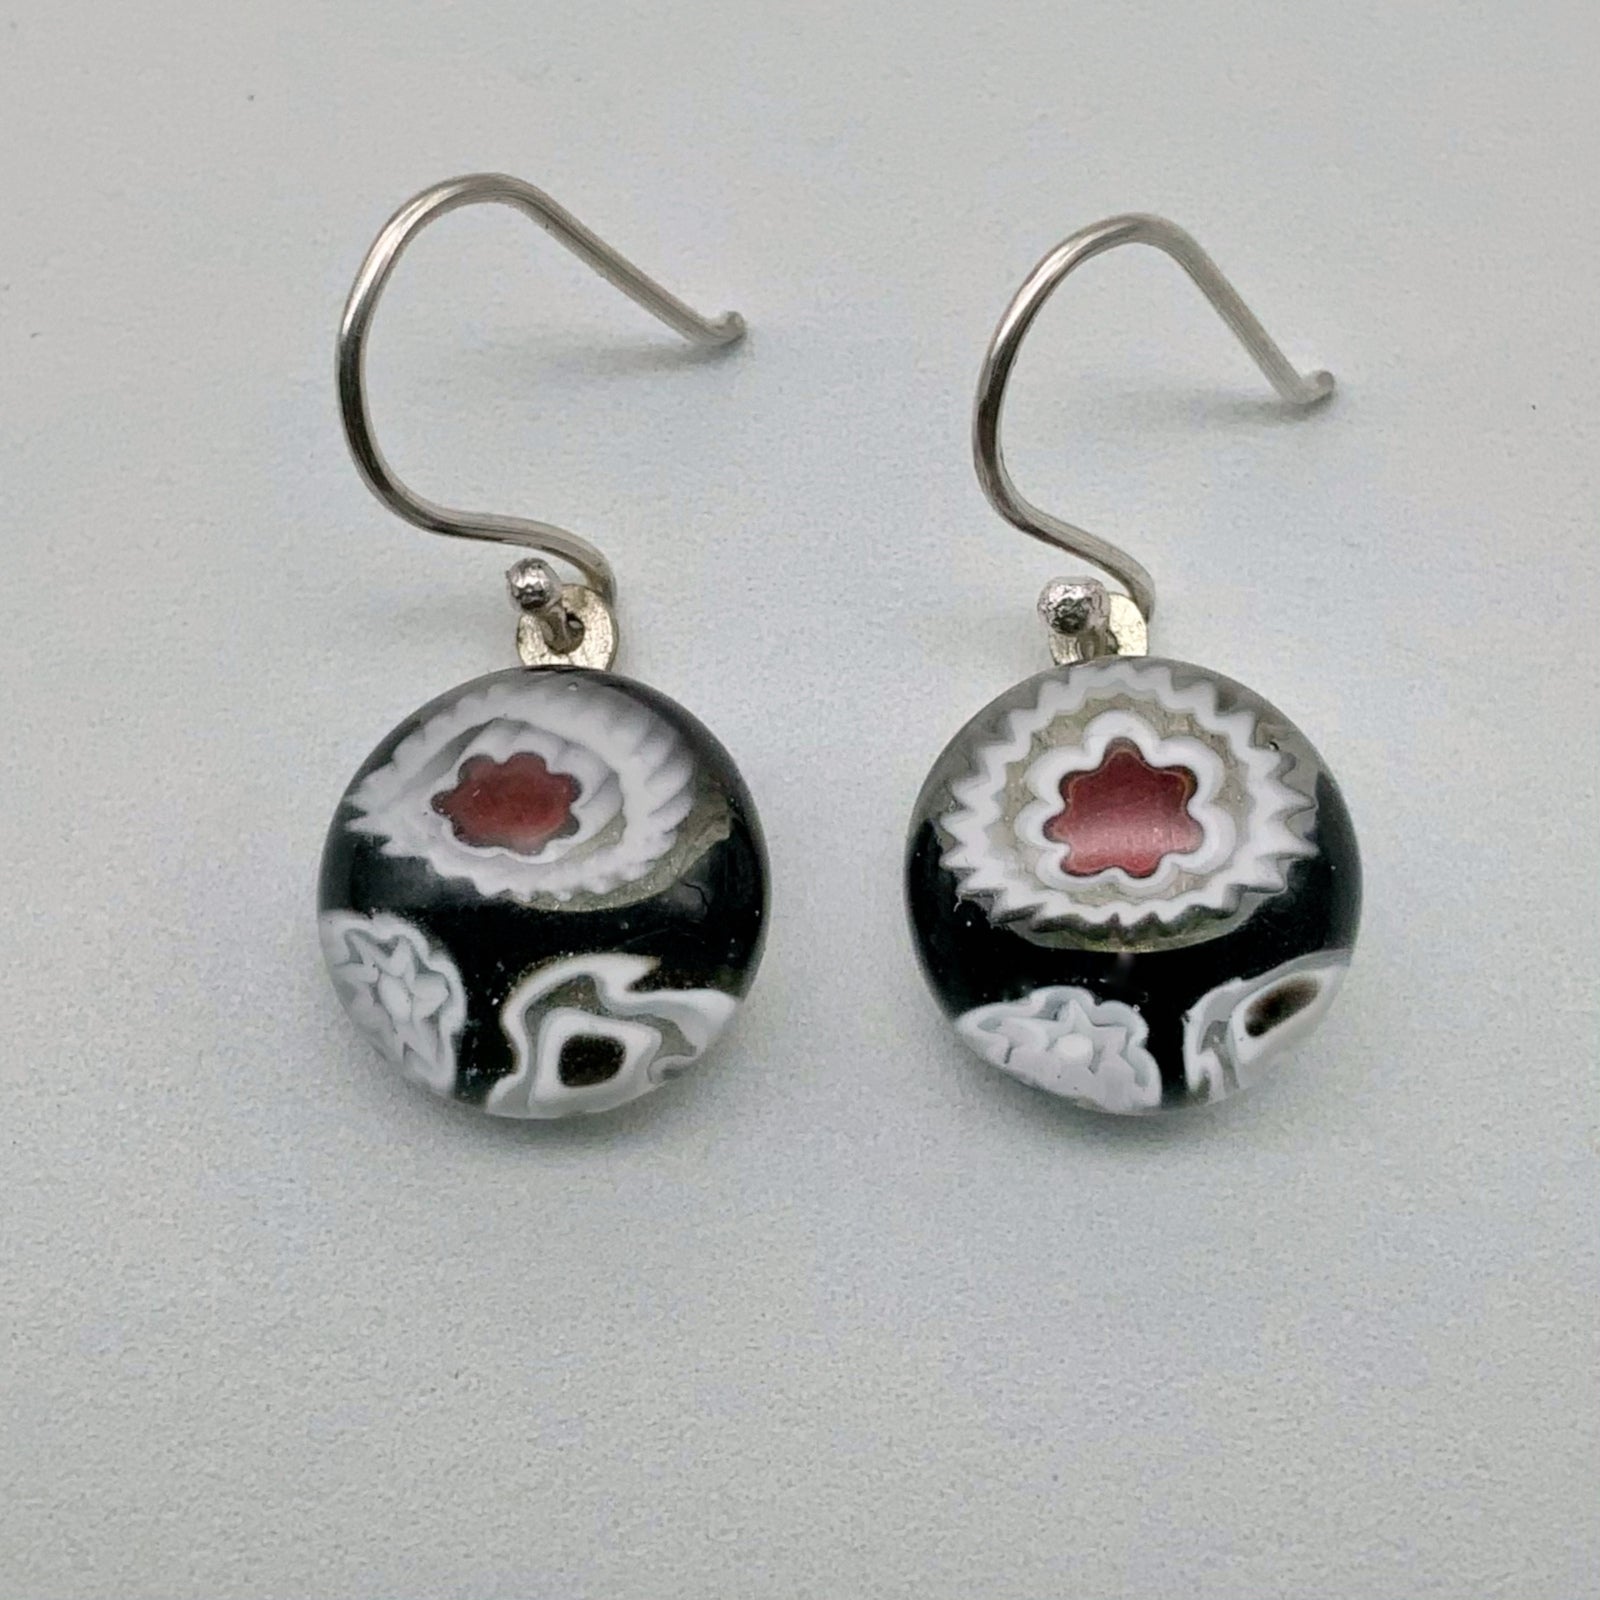 Black, red and white dangle glass earrings